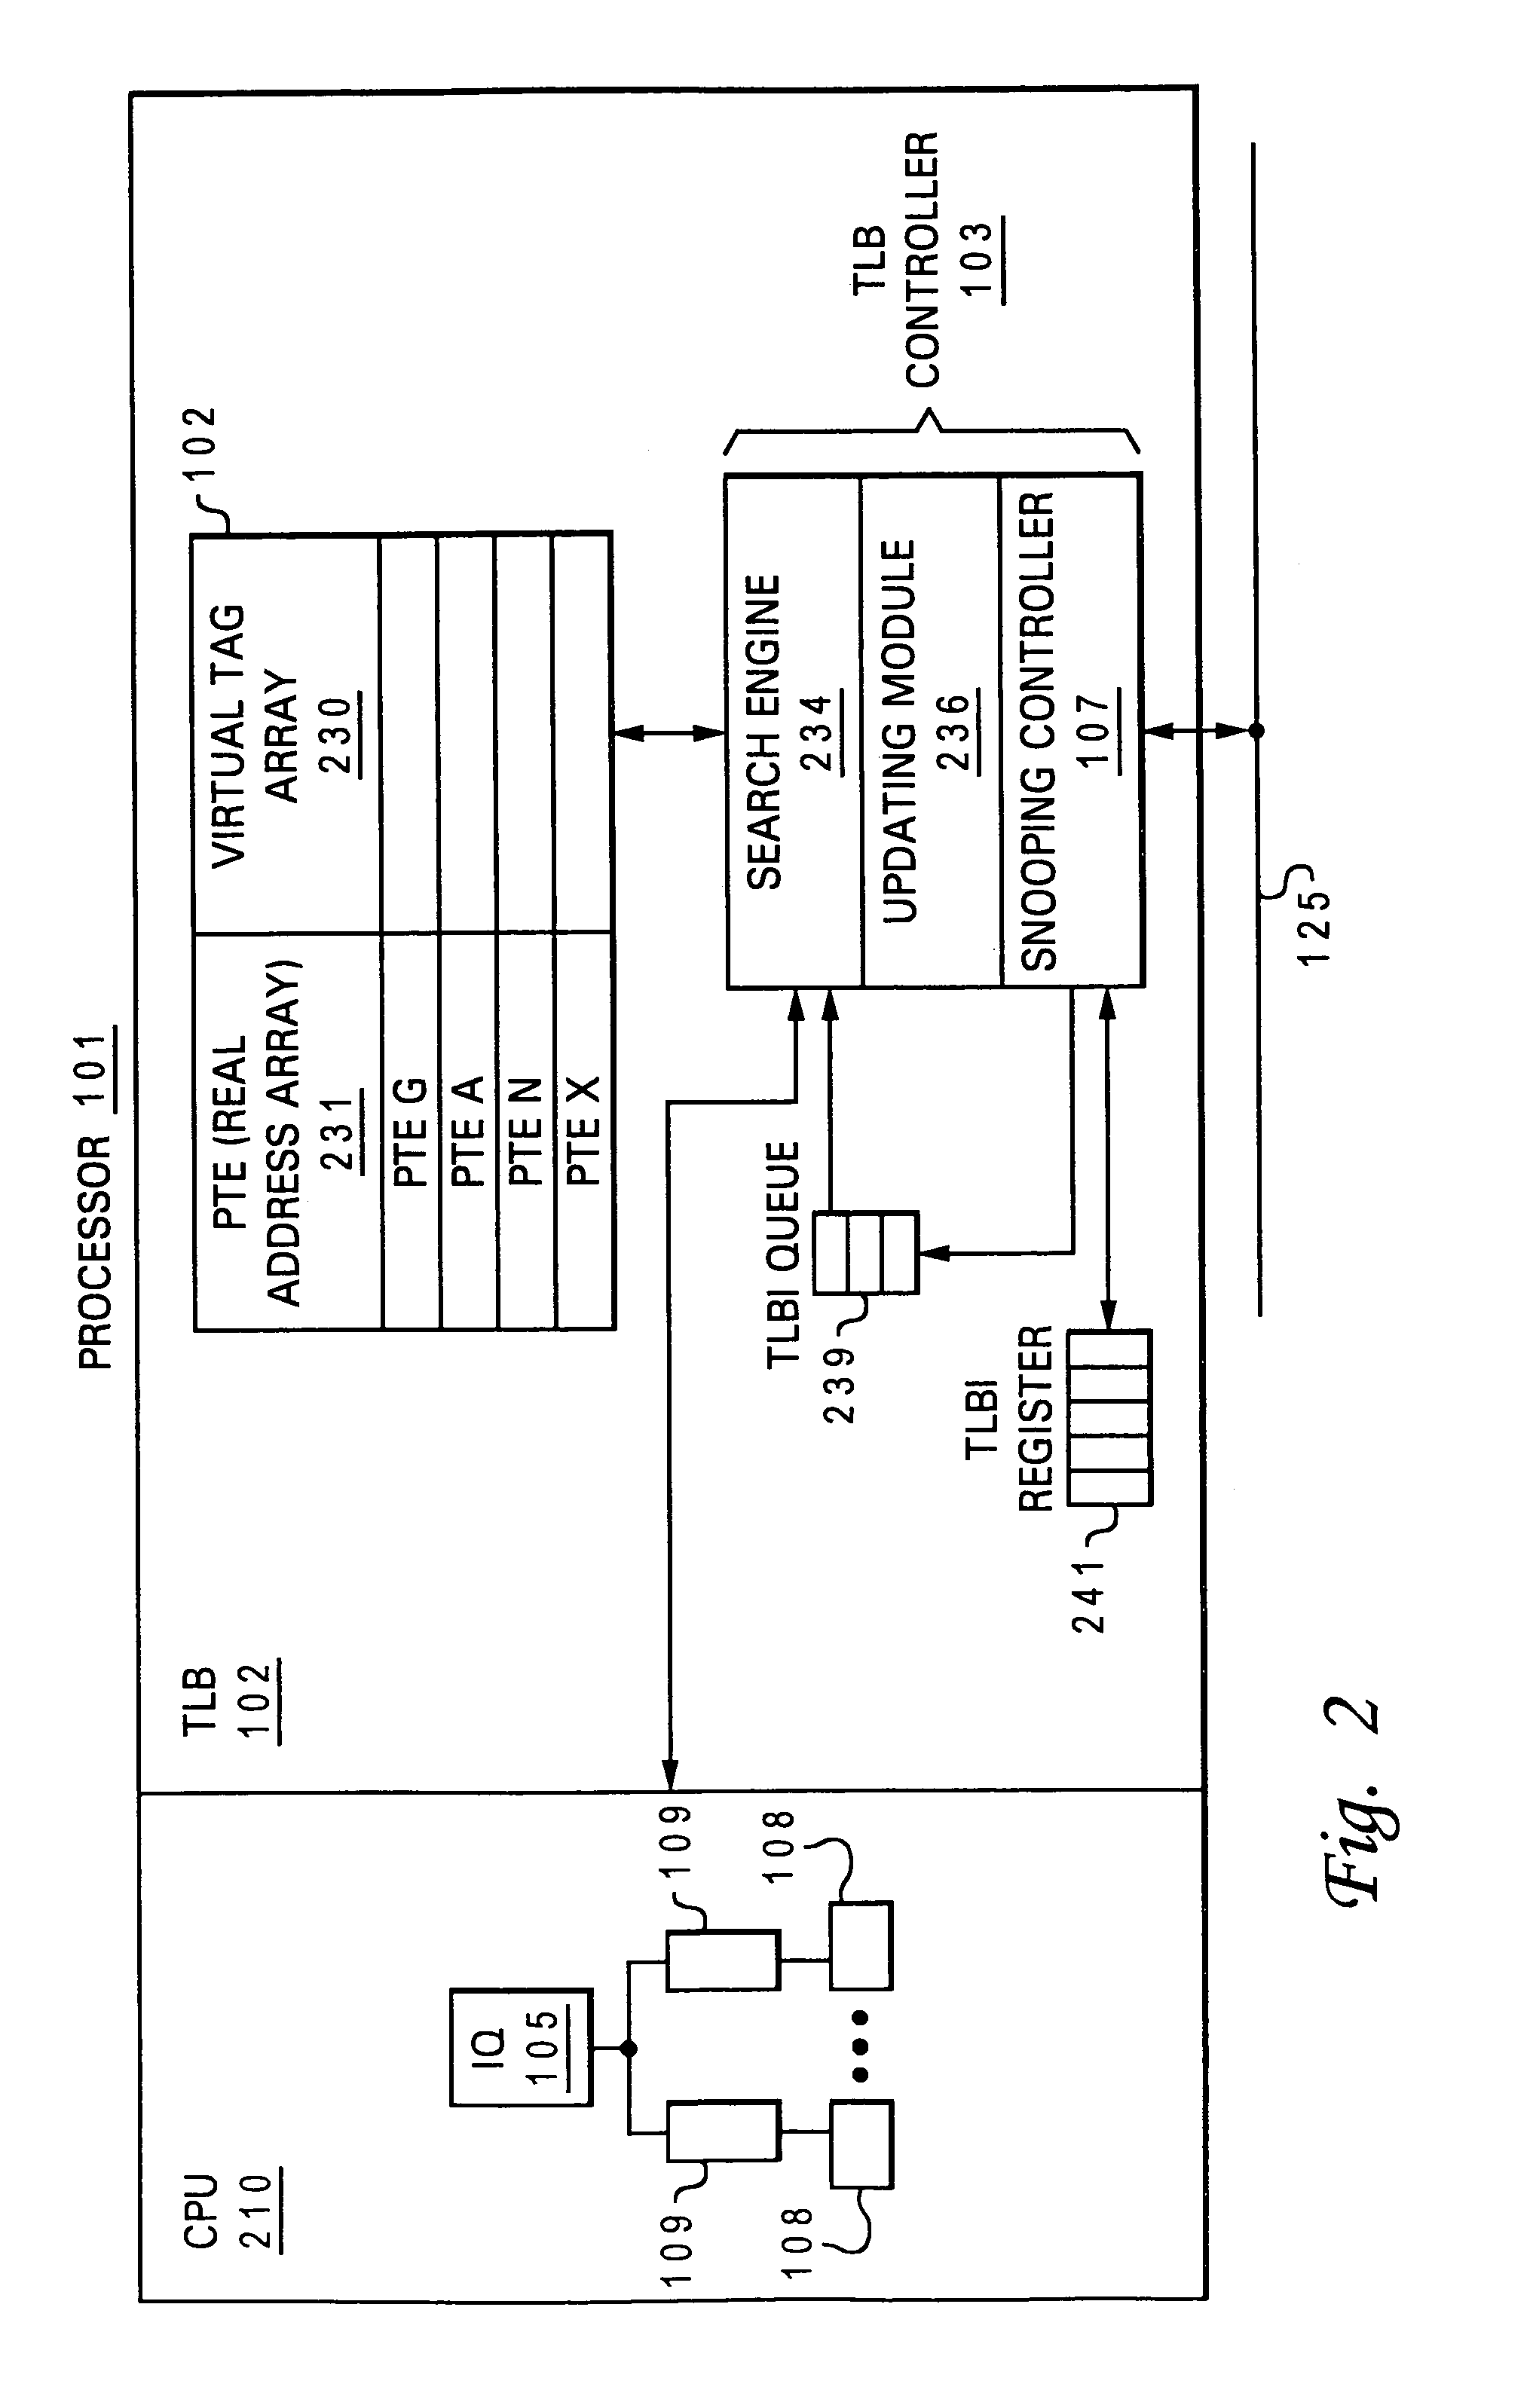 Multiprocessor system supporting multiple outstanding TLBI operations per partition